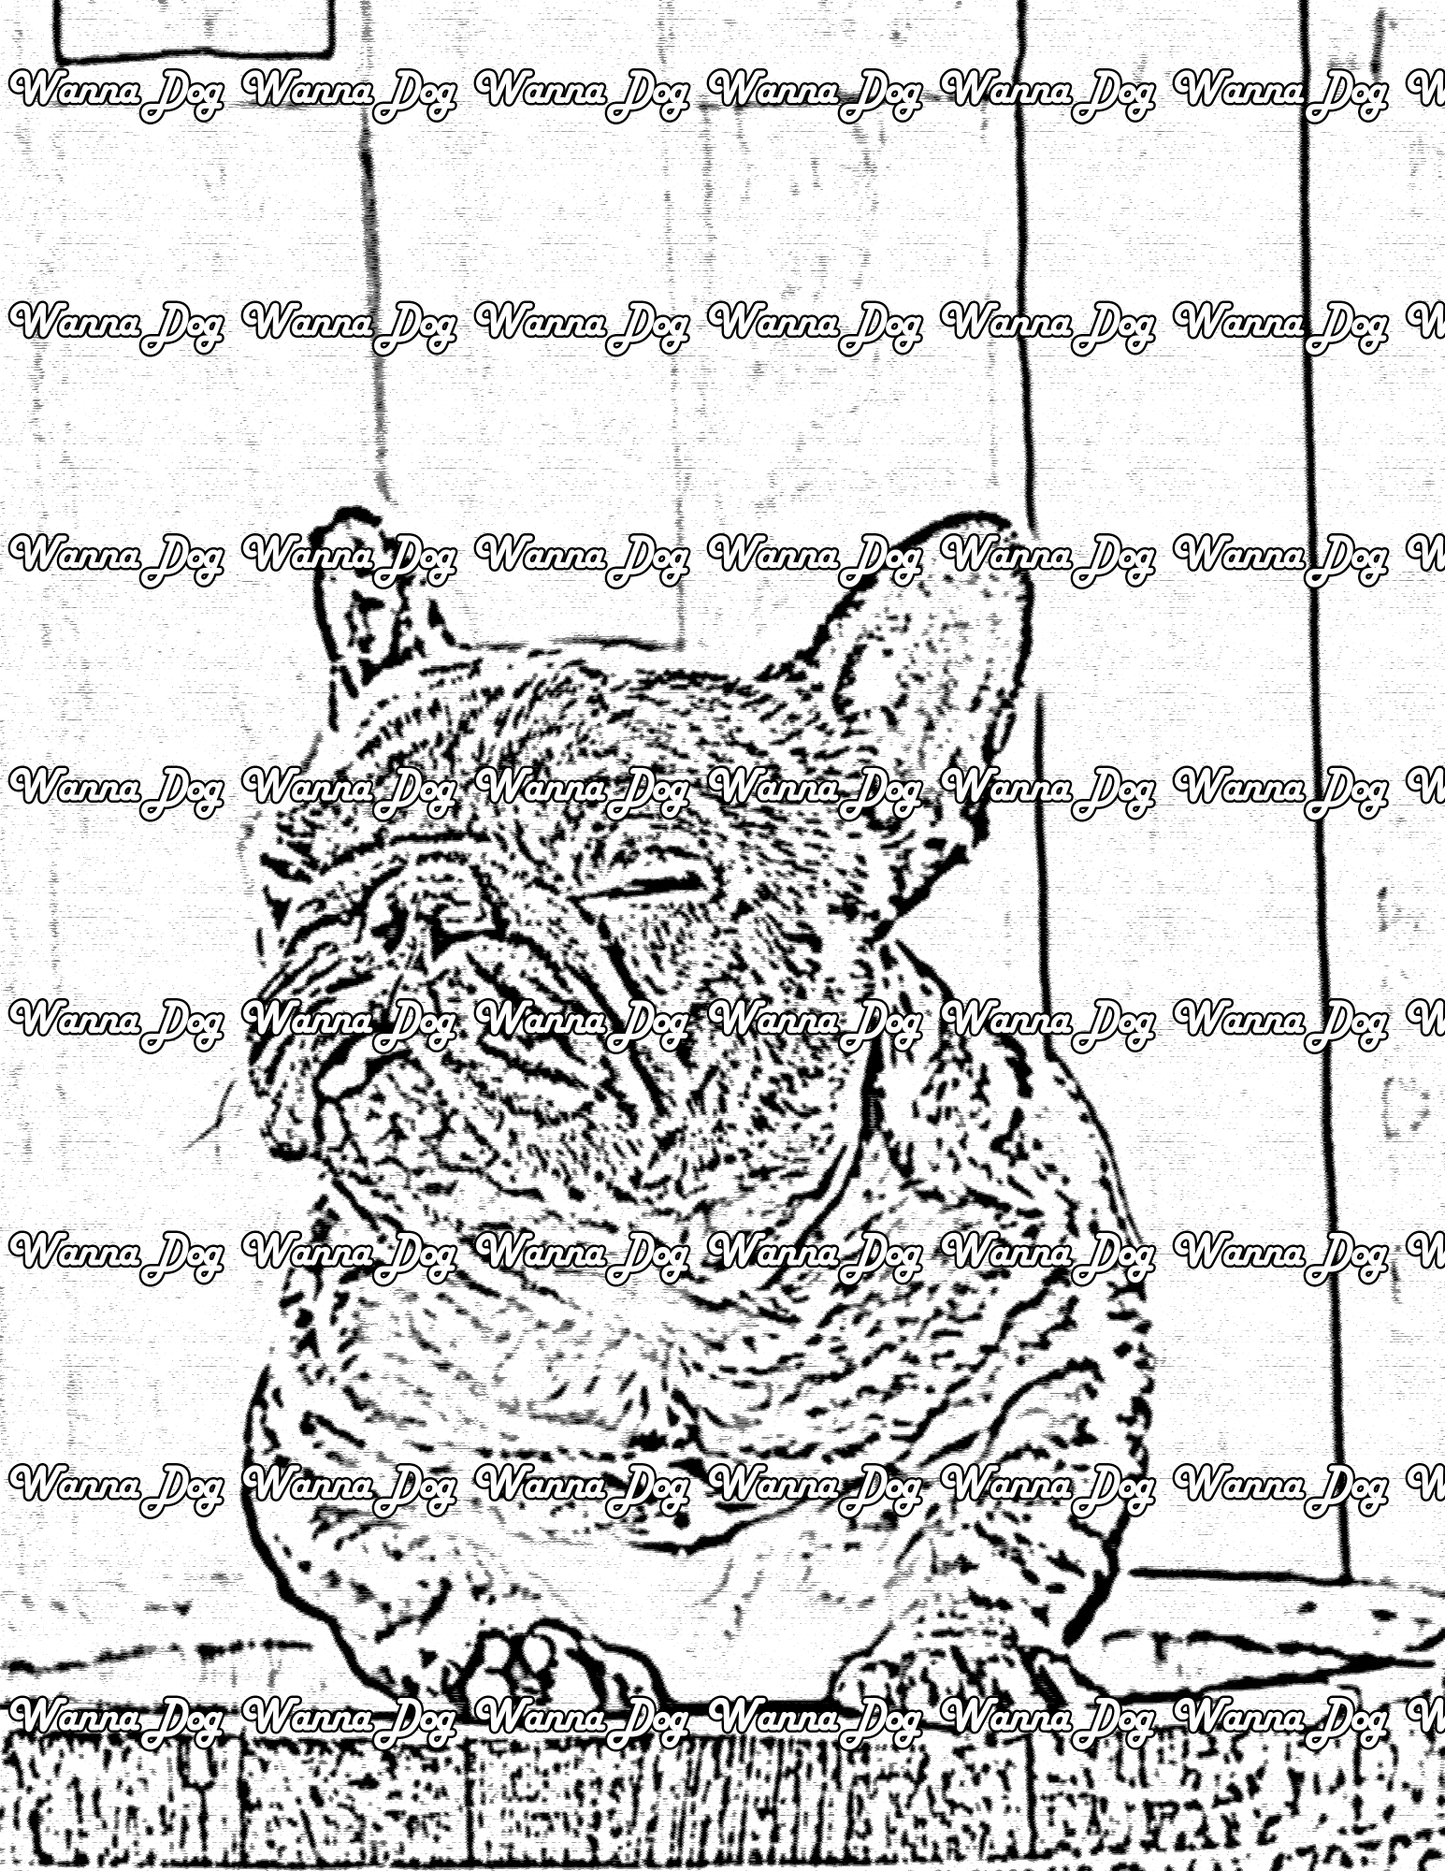 French Bulldog Coloring Page of a French Bulldog with their tongue out